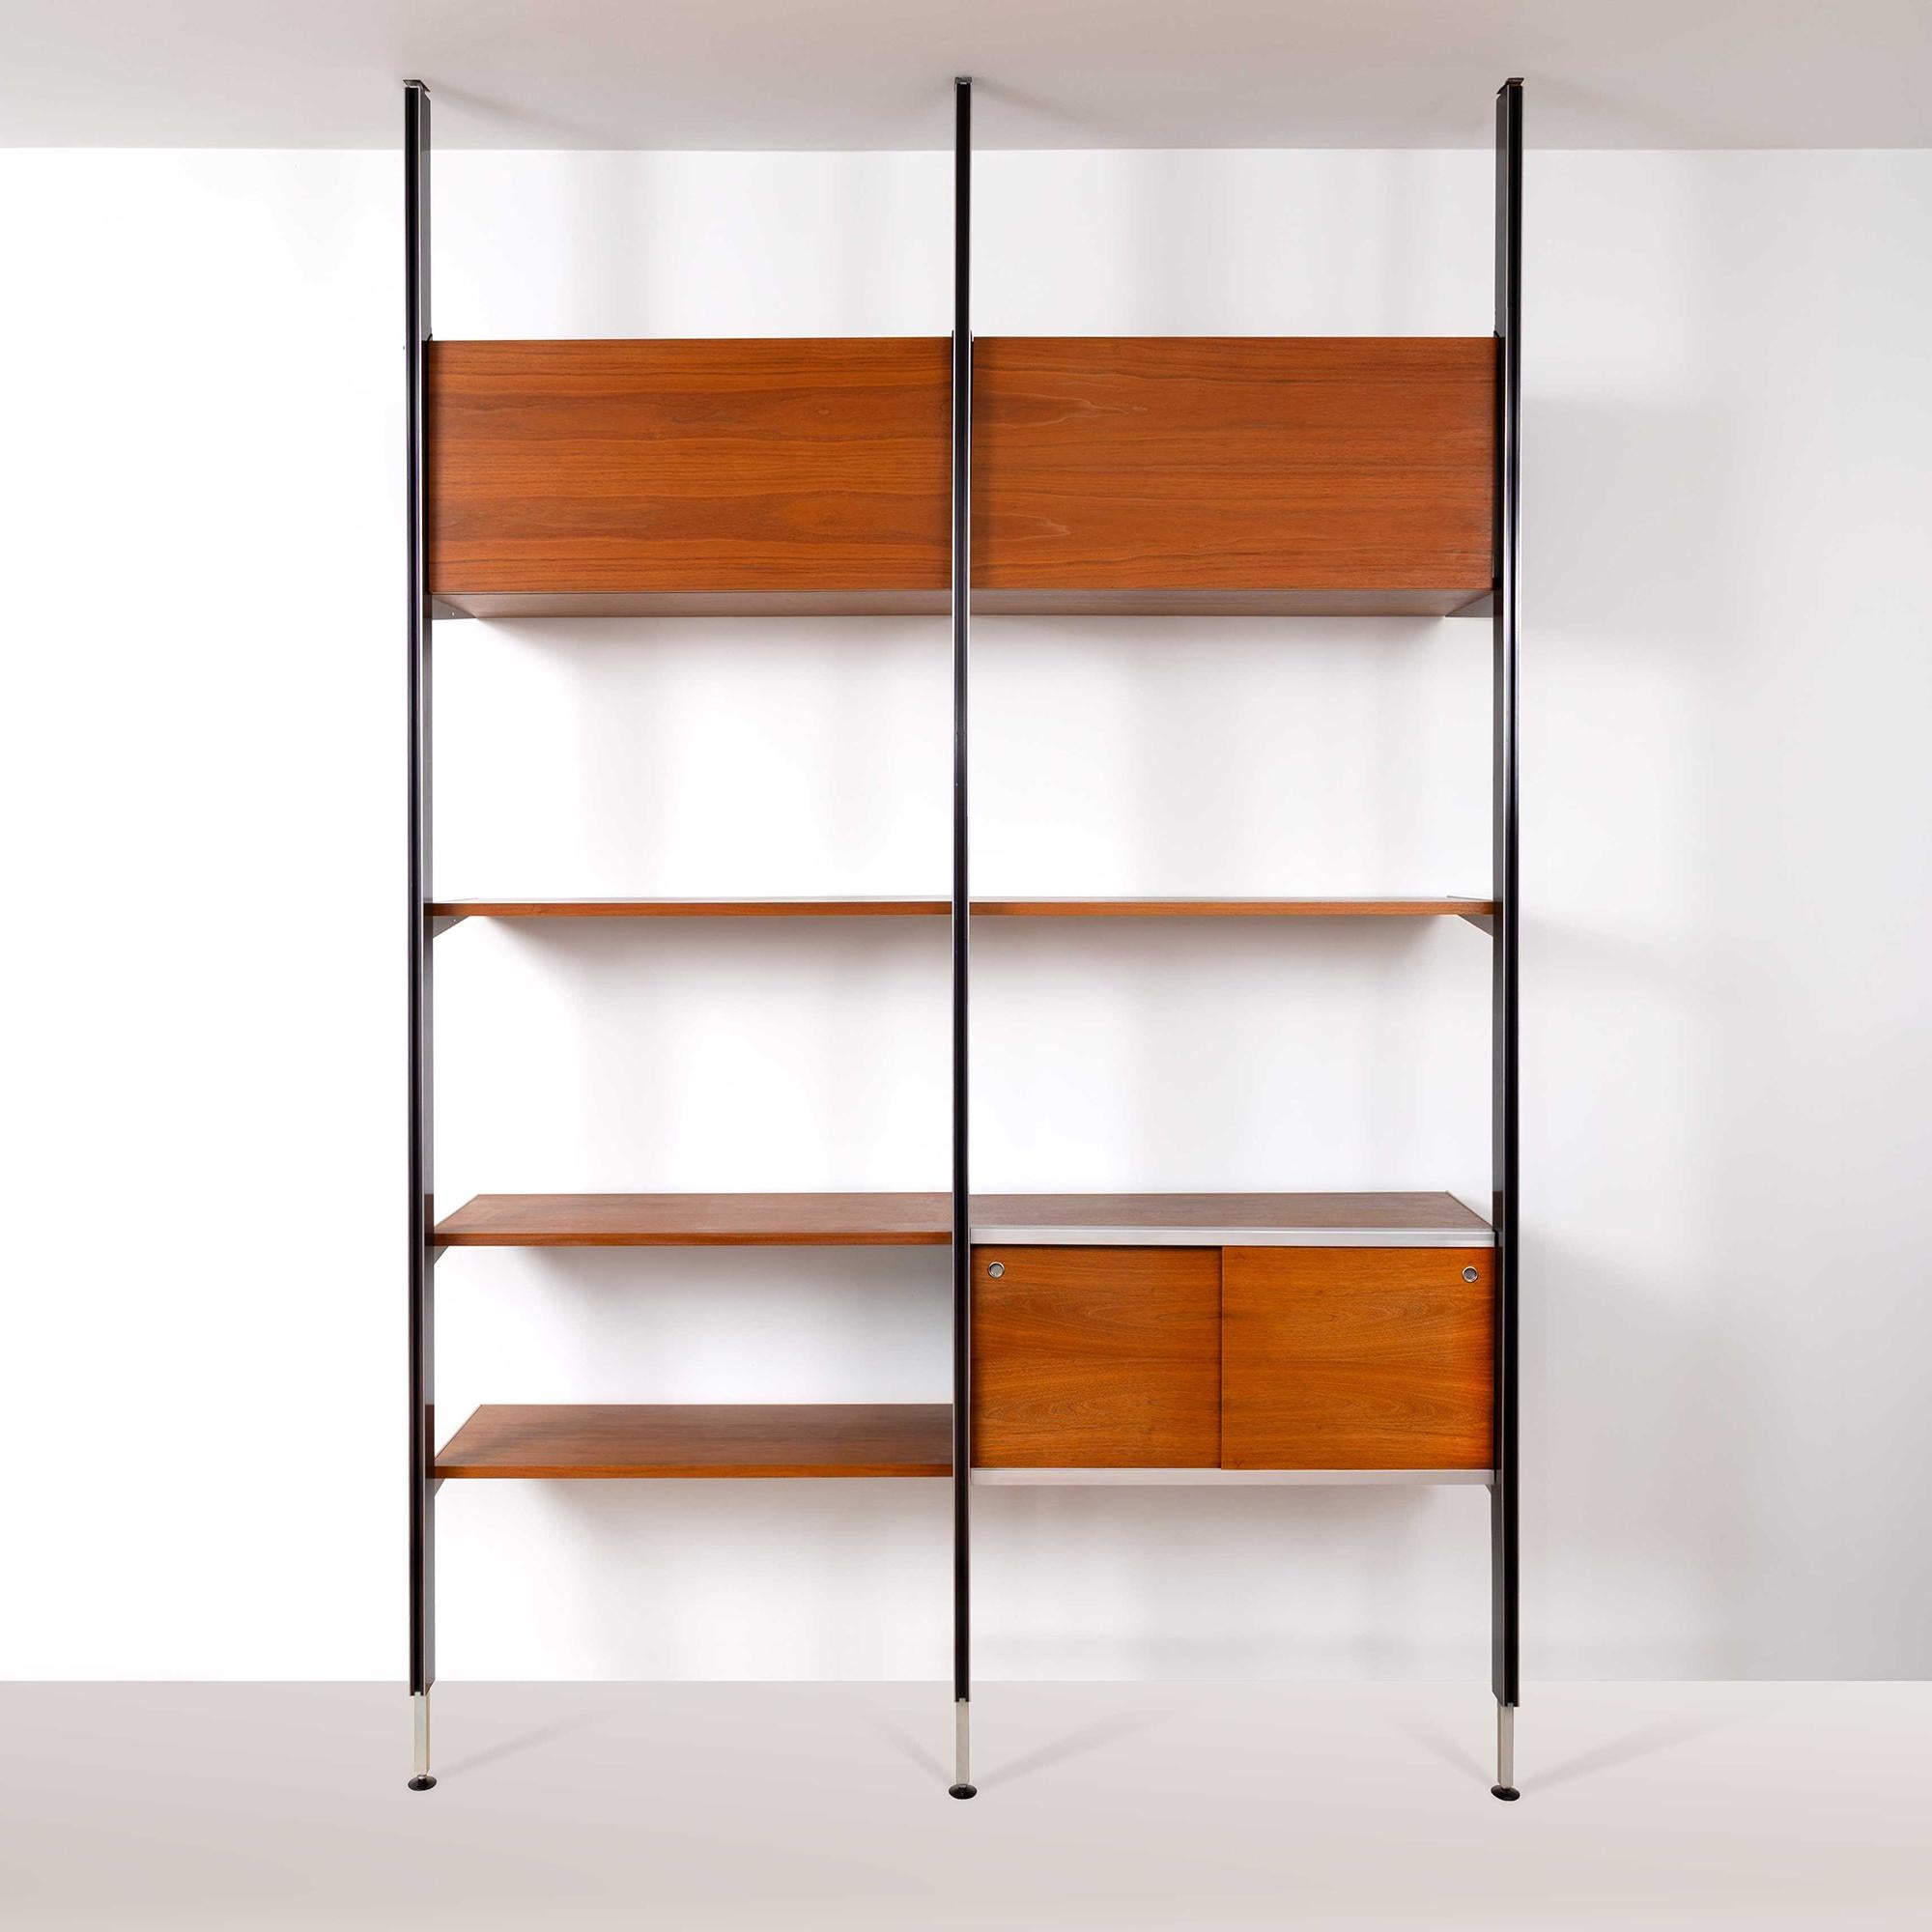 Herman Miller introduced George Nelson’s Comprehensive Storage System (CSS) in 1959 and produced it until 1973. Available in various wood finishes, the CSS could also be customized to fit customers' needs, thanks to its modular units, including